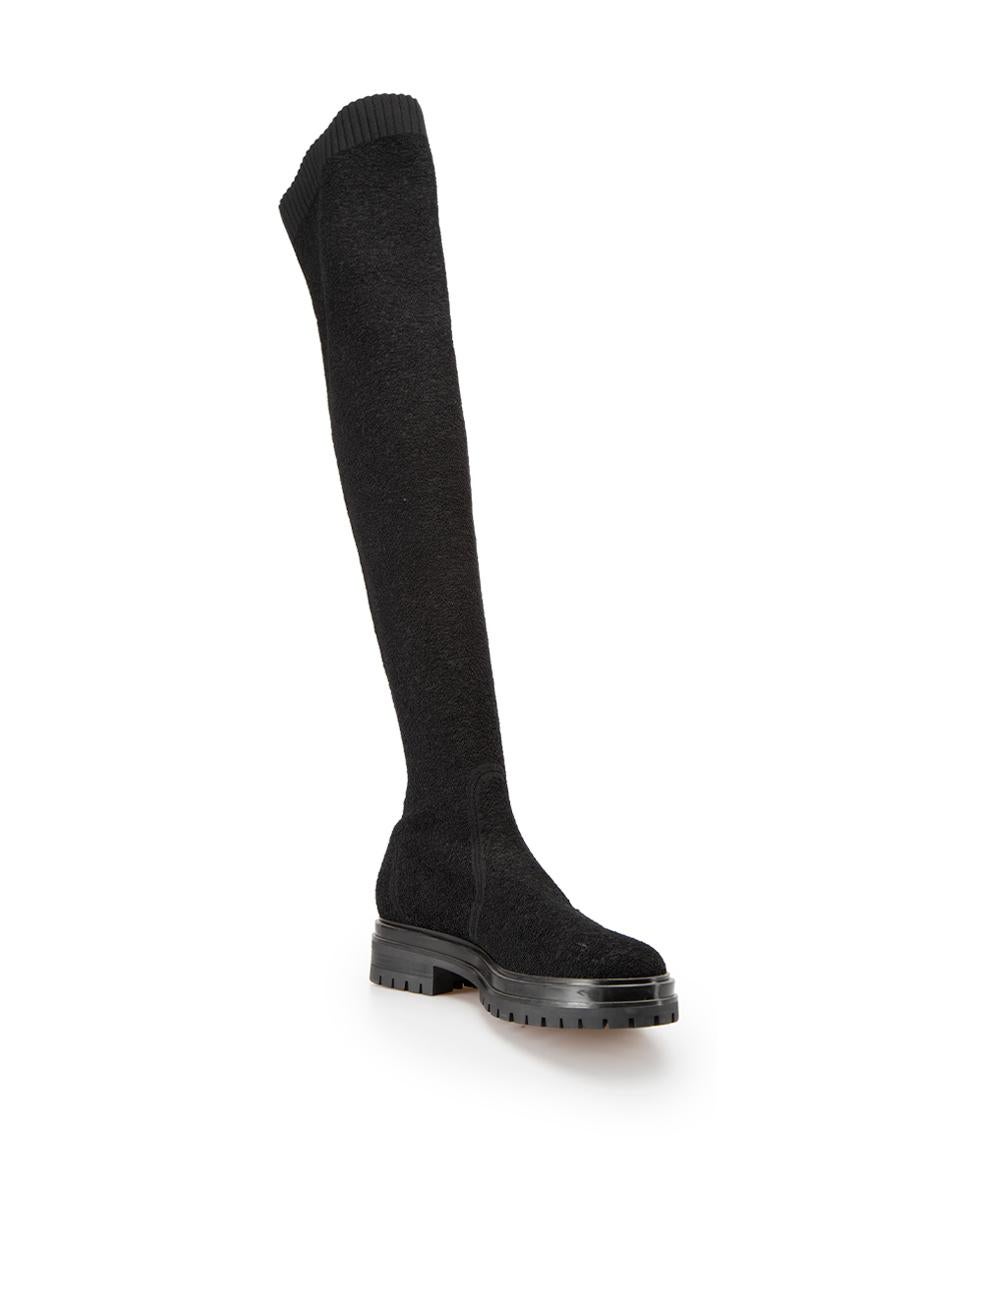 CONDITION is Very good. Minimal wear to boots is evident. Minimal wear to back of heels on this used Gianvito Rossi designer resale item.



Details


Black

Cloth textile

Knitted boots

Over the knee

Stretchy

Round toe





Made in